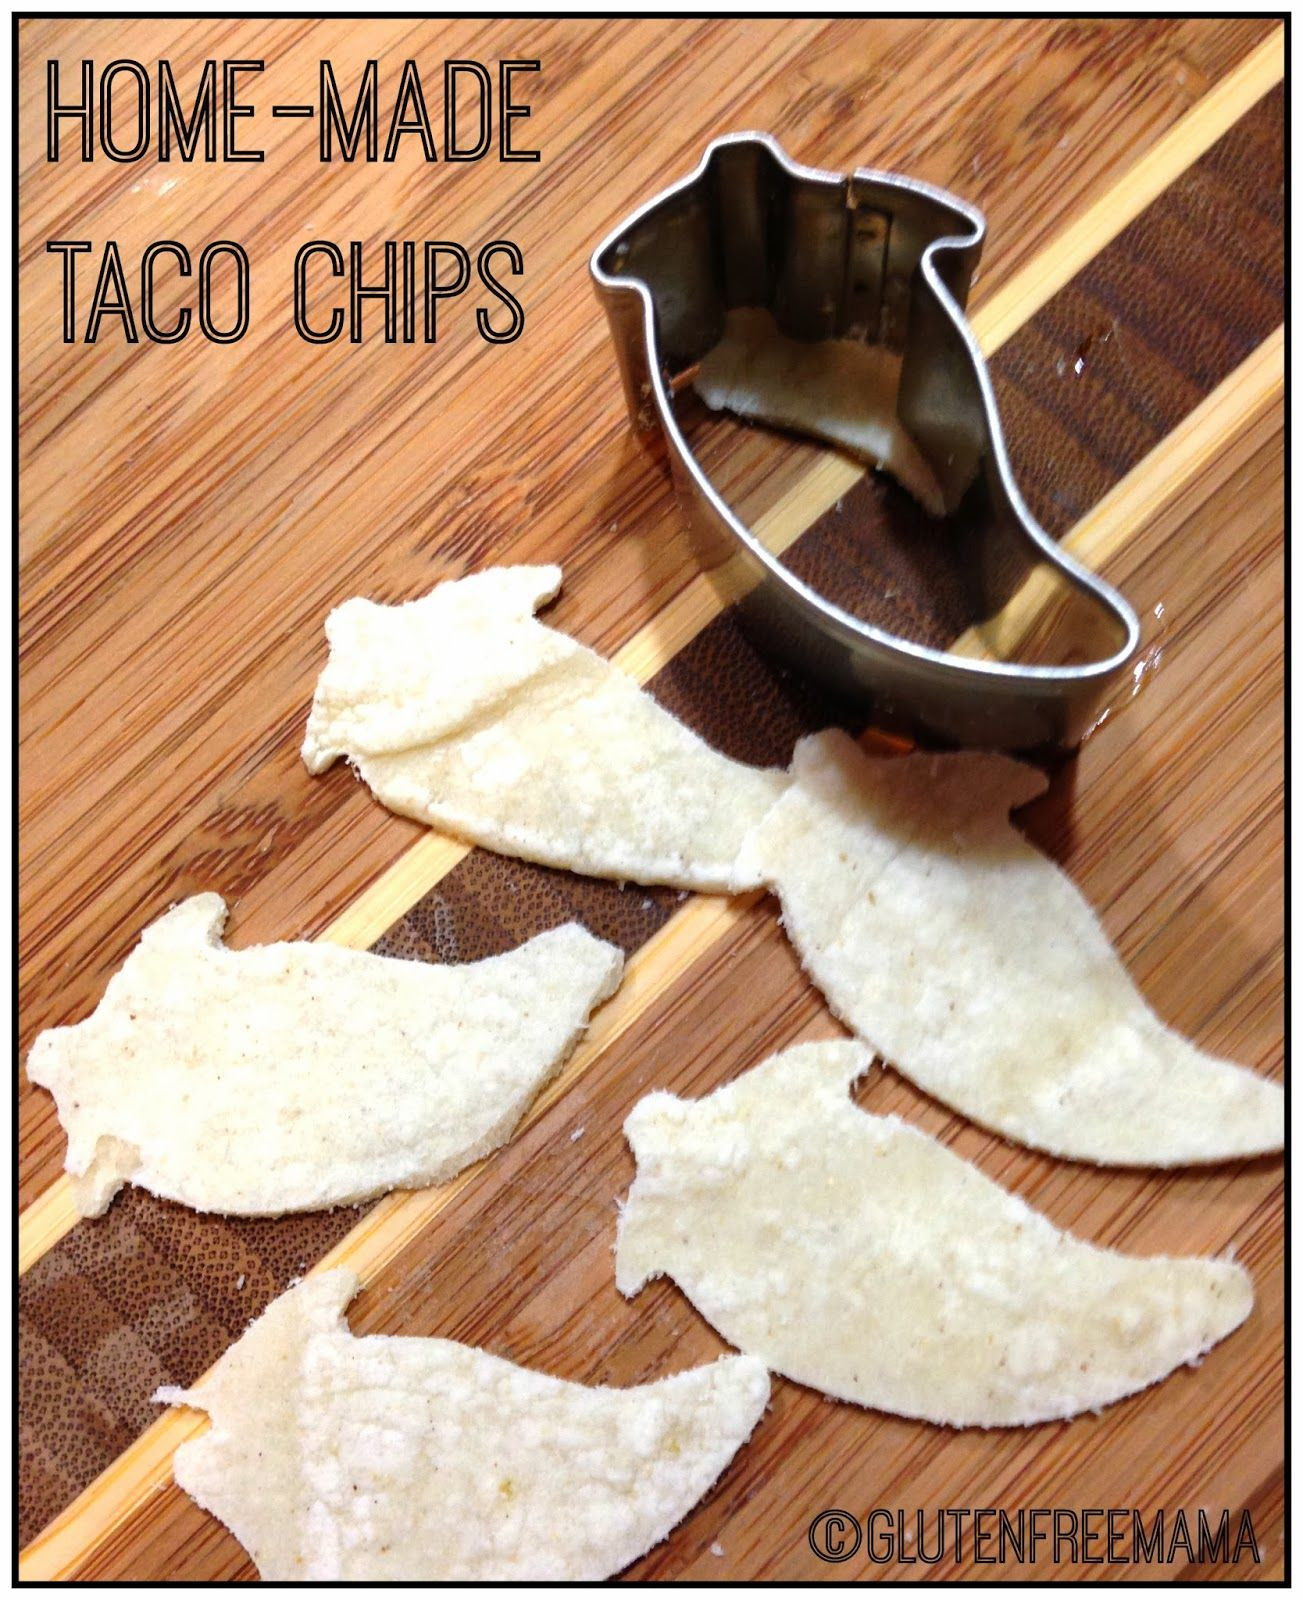 Gluten Free Appetizers Food Network
 Homemade Taco Chips make great garnishes for soups and